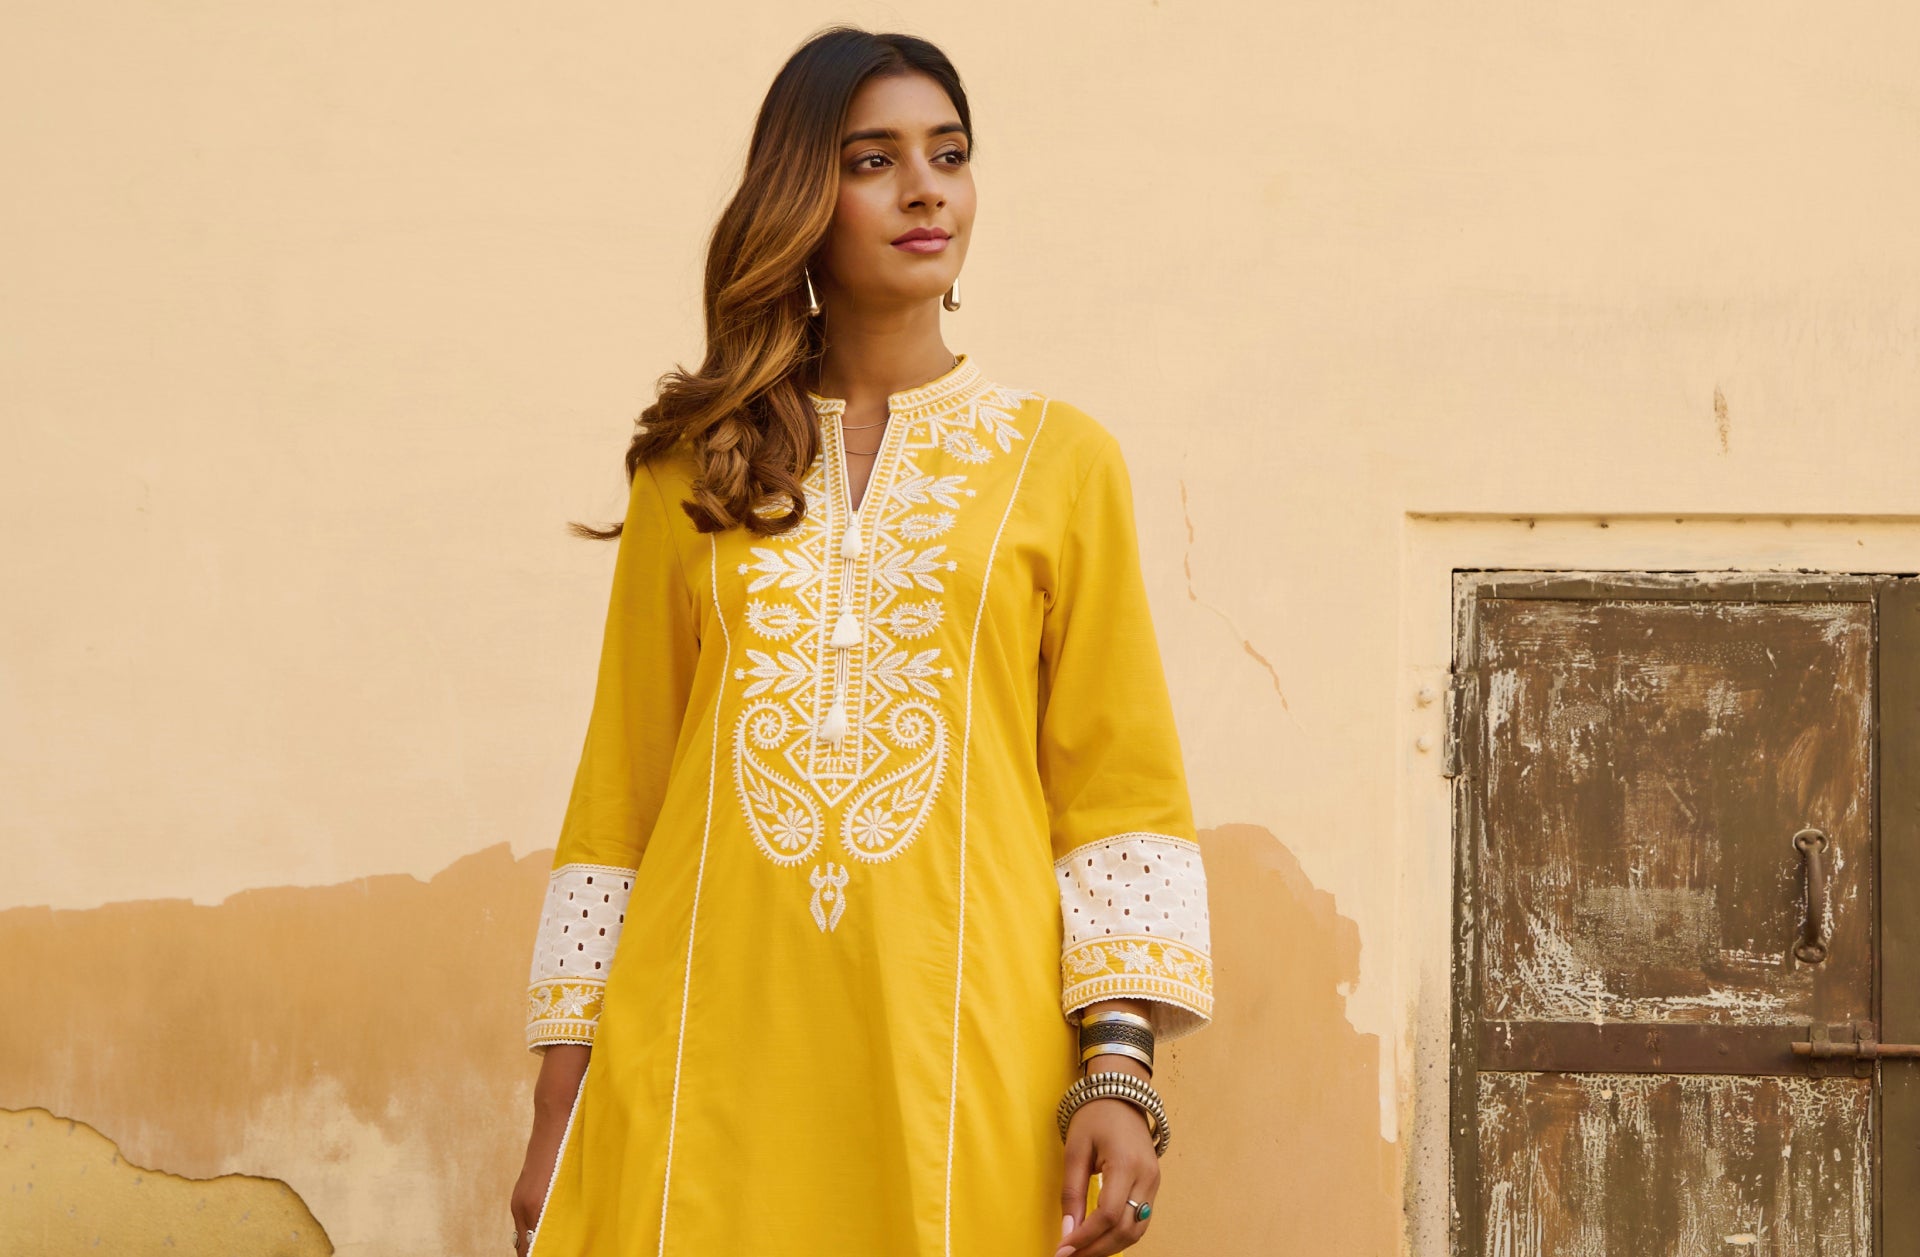 Ethnic Wear For Expecting Mothers: Comfy And Stylish